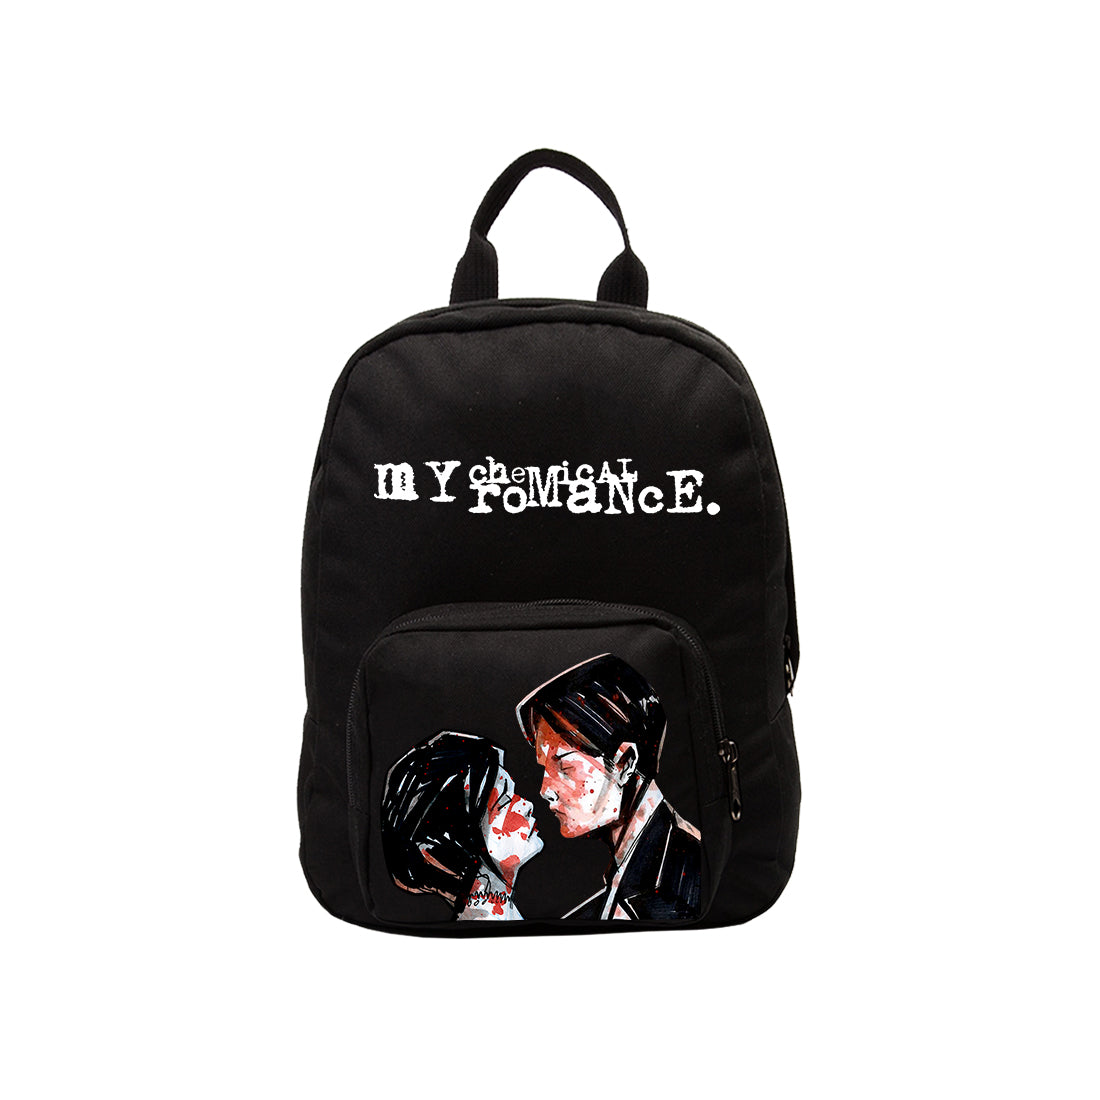 Rocksax My Chemical Romance Mini Backpack - Three Cheers From £27.99